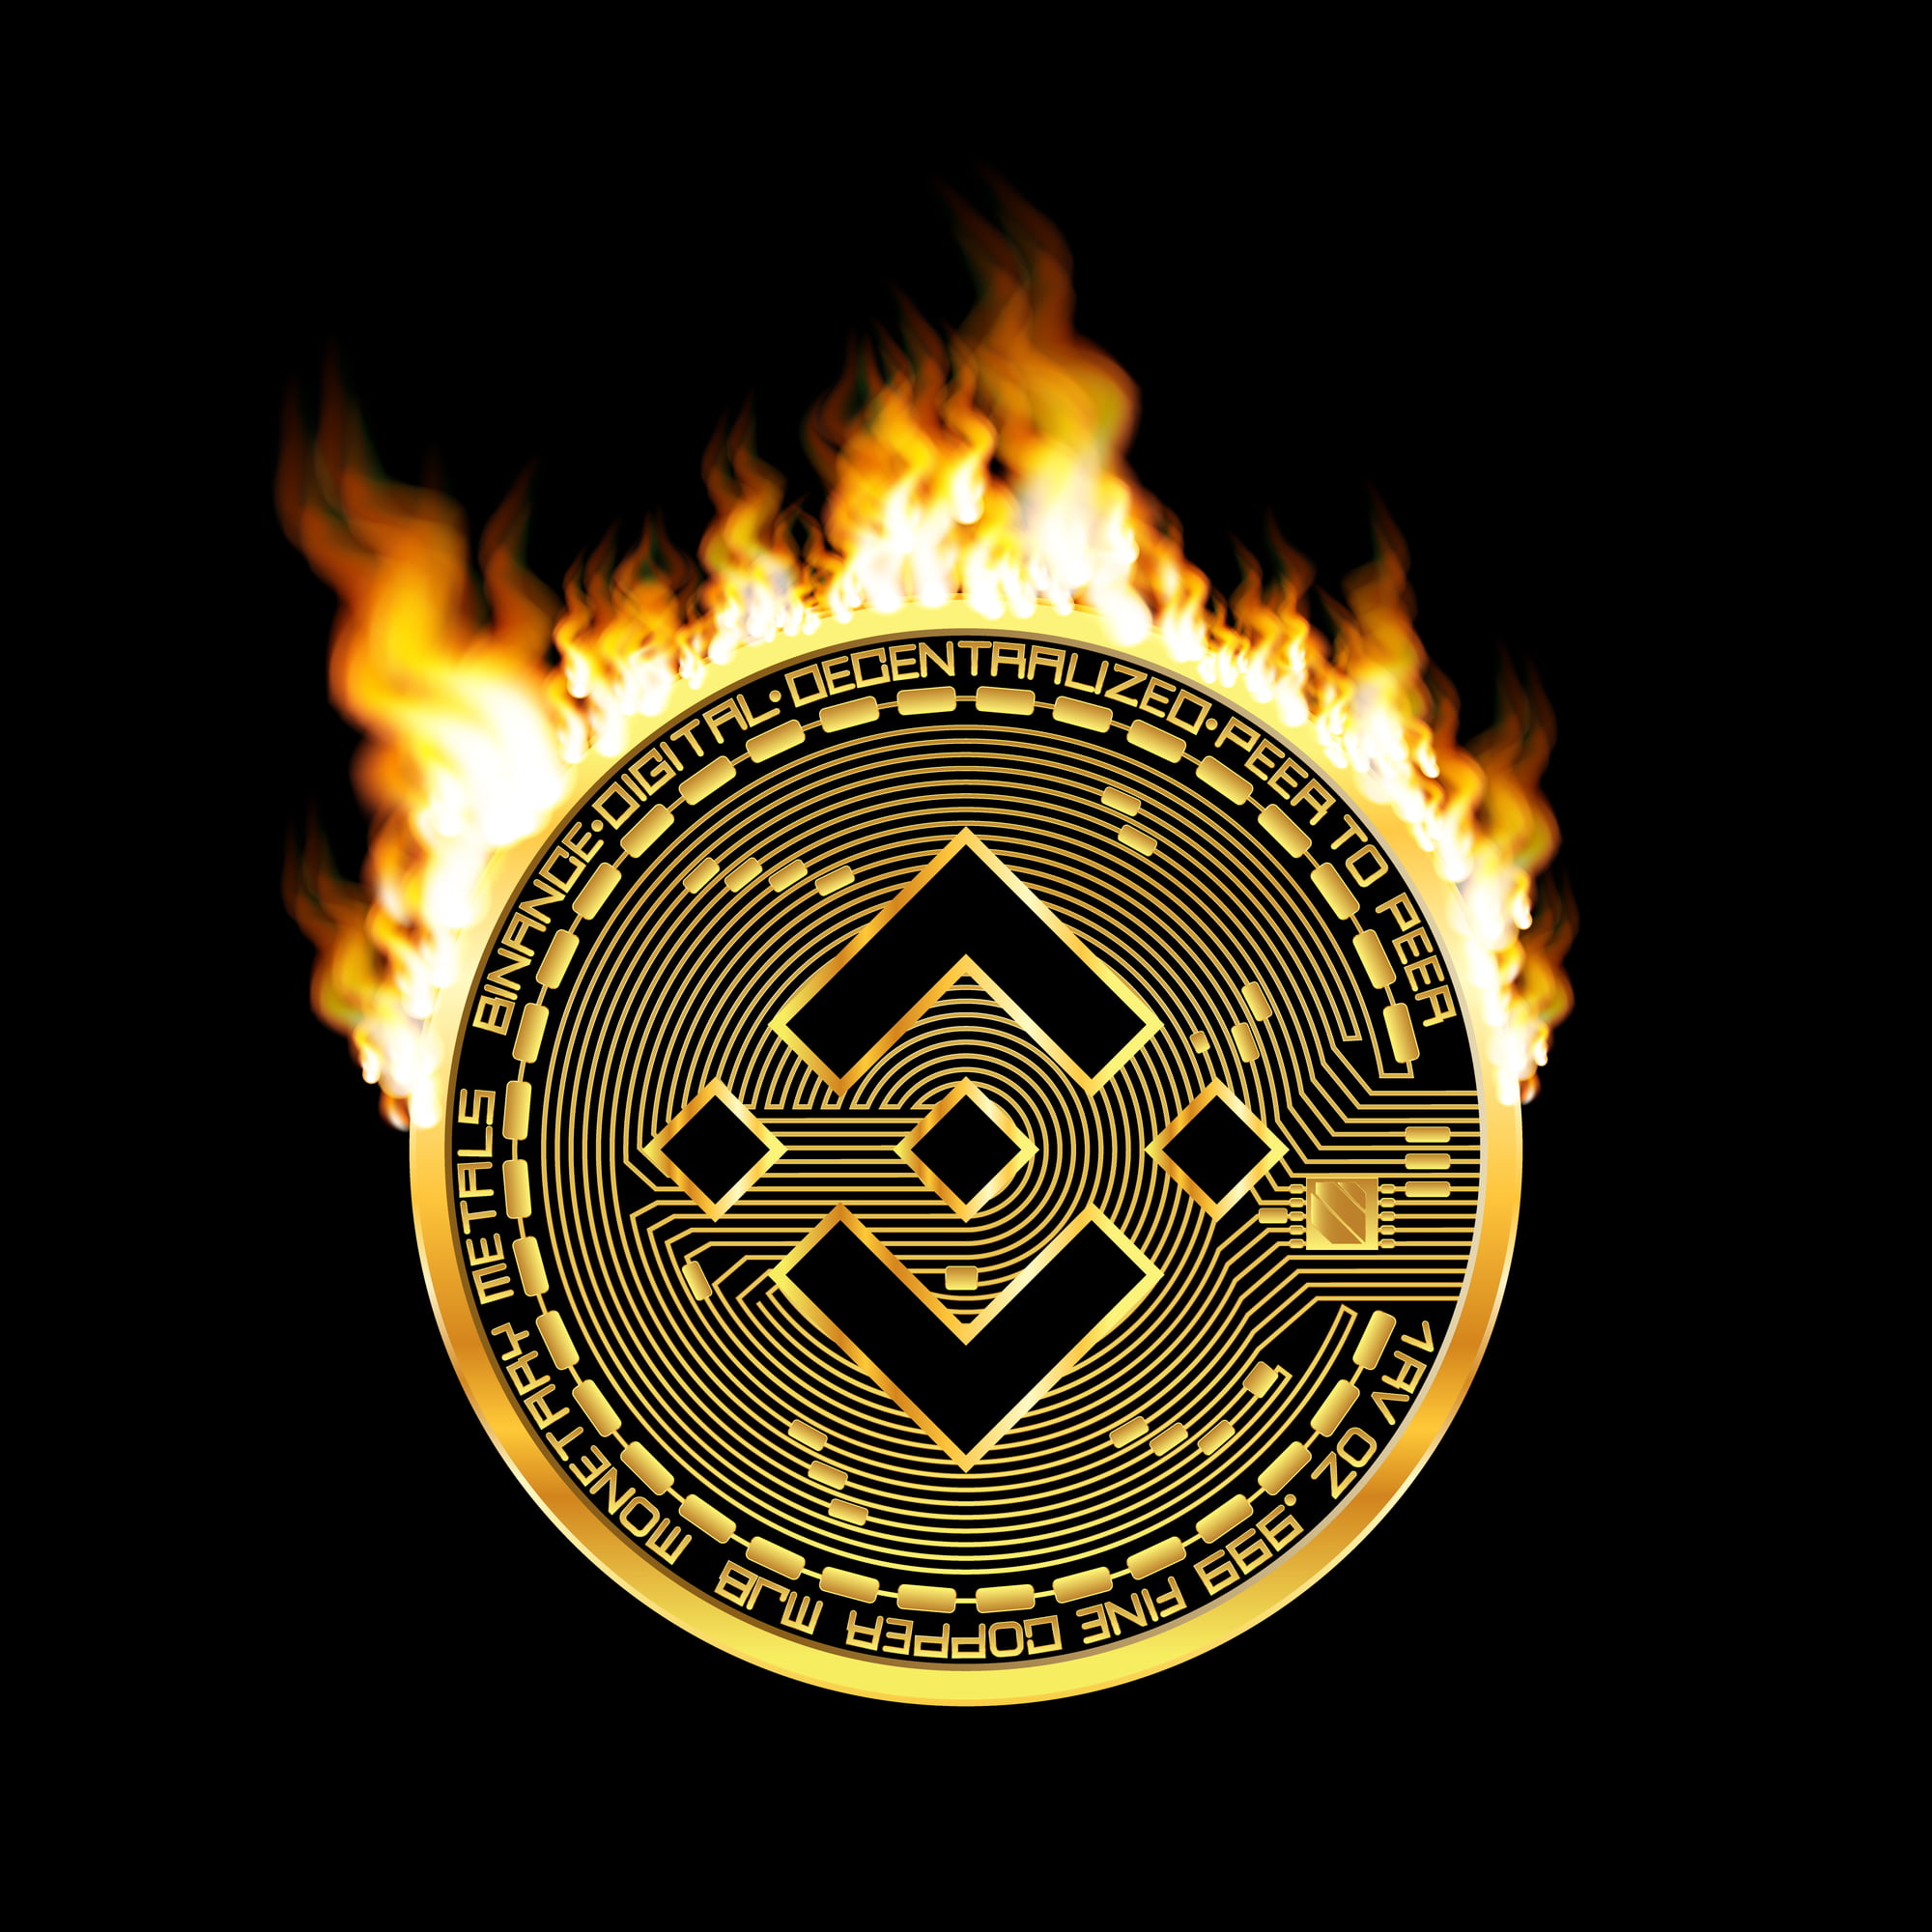 cryptocurrency binance coin